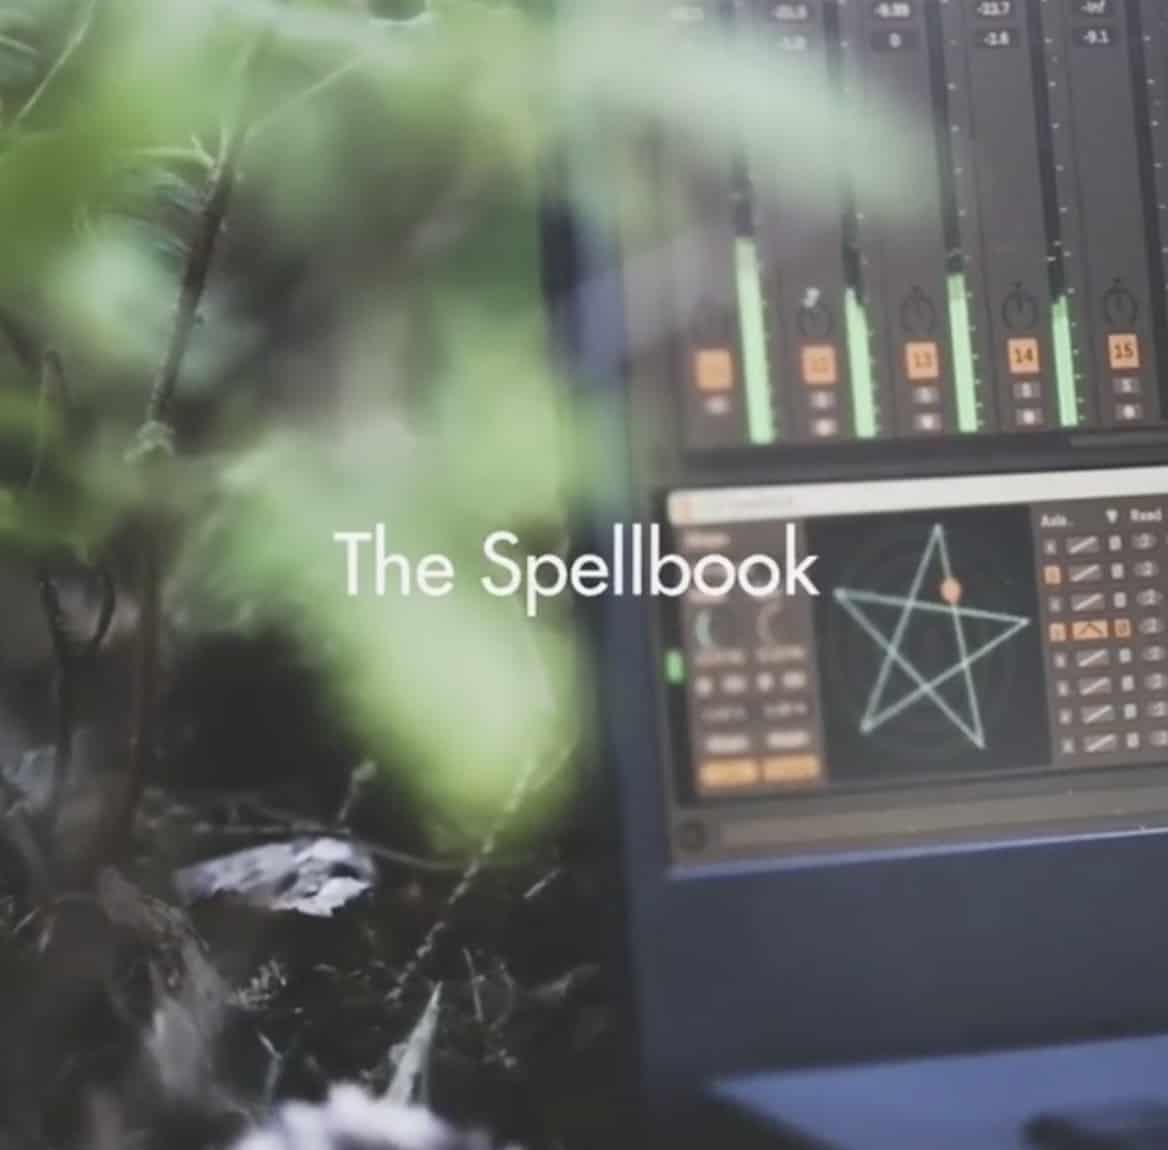 The Spellbook Sacred modulations for Ableton Max users